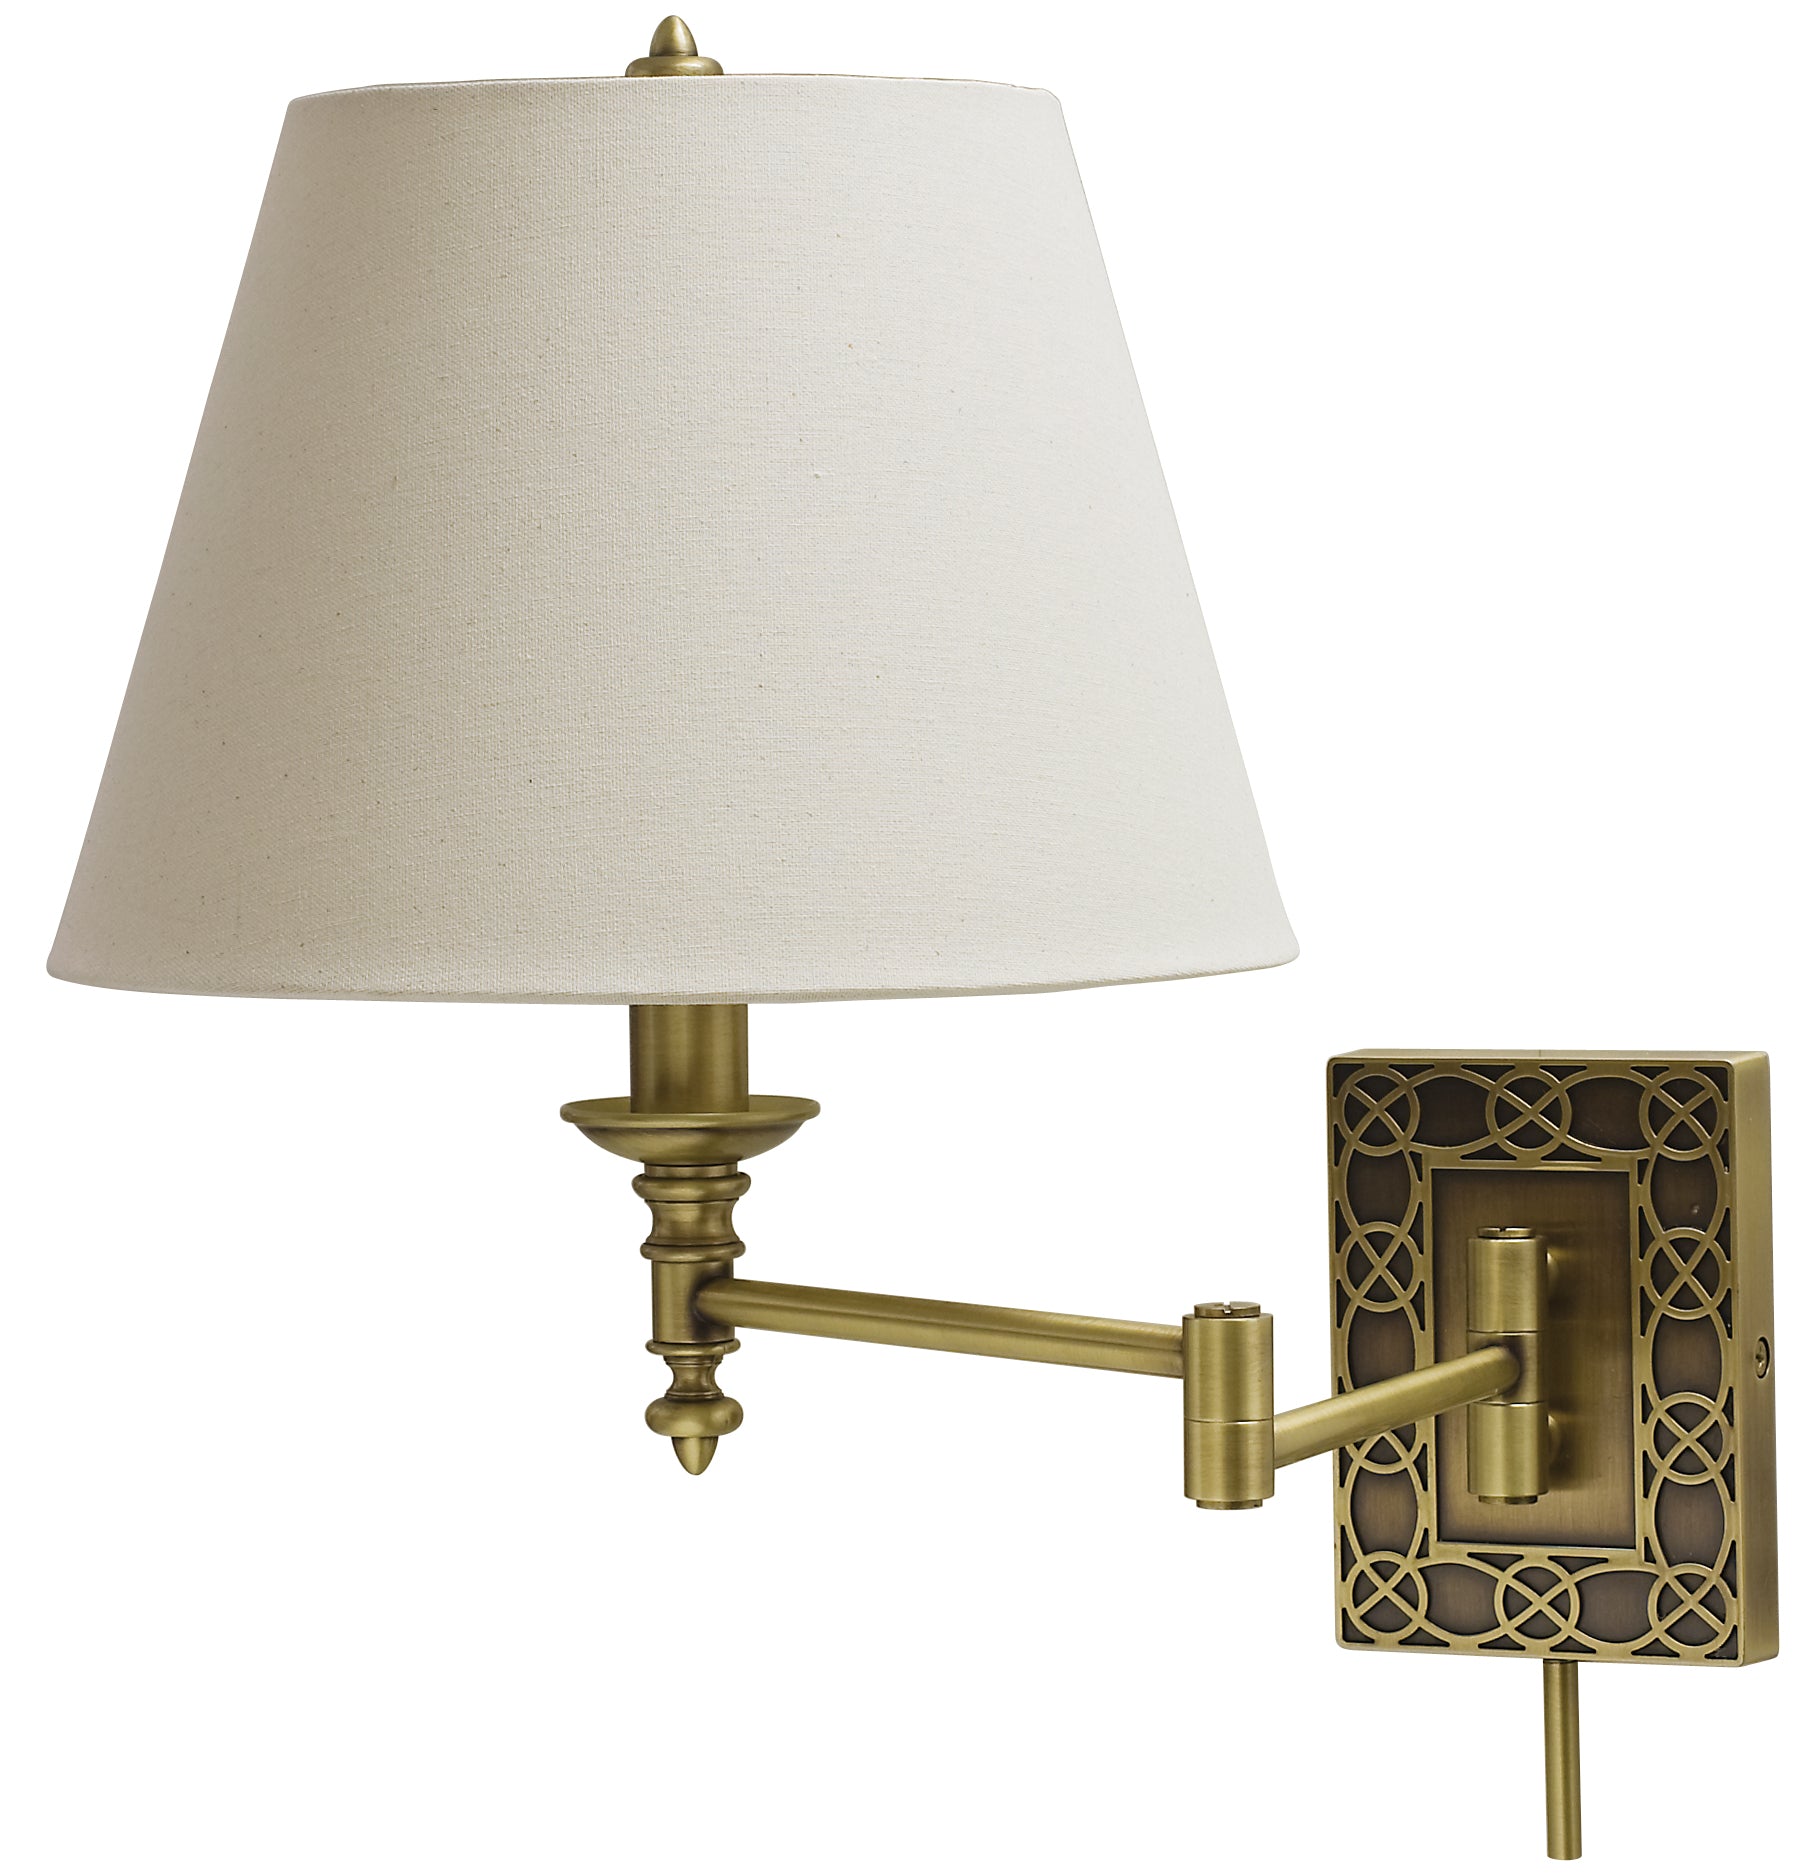 House of Troy Wall Swing Arm Lamp in Antique Brass WS763-AB